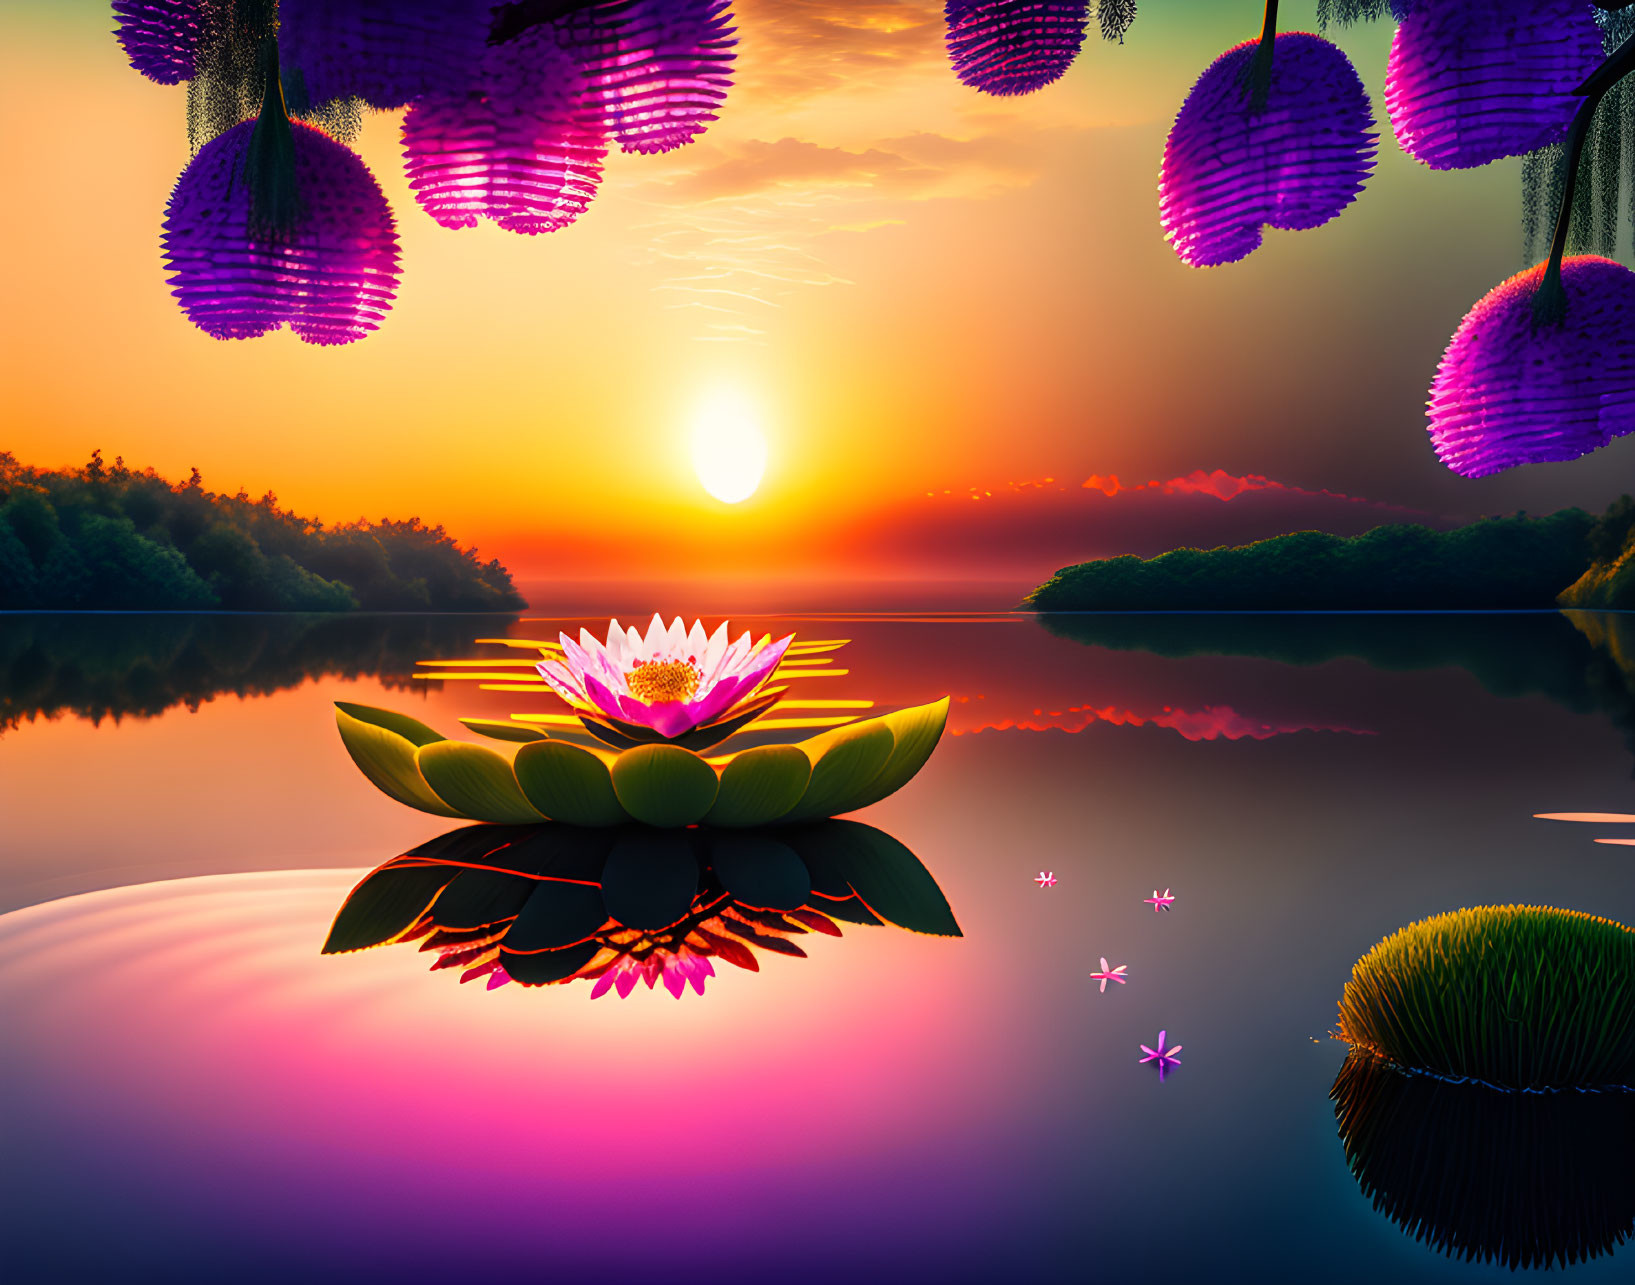 Colorful sunset over serene lake with lotus flower and hanging purple blooms.